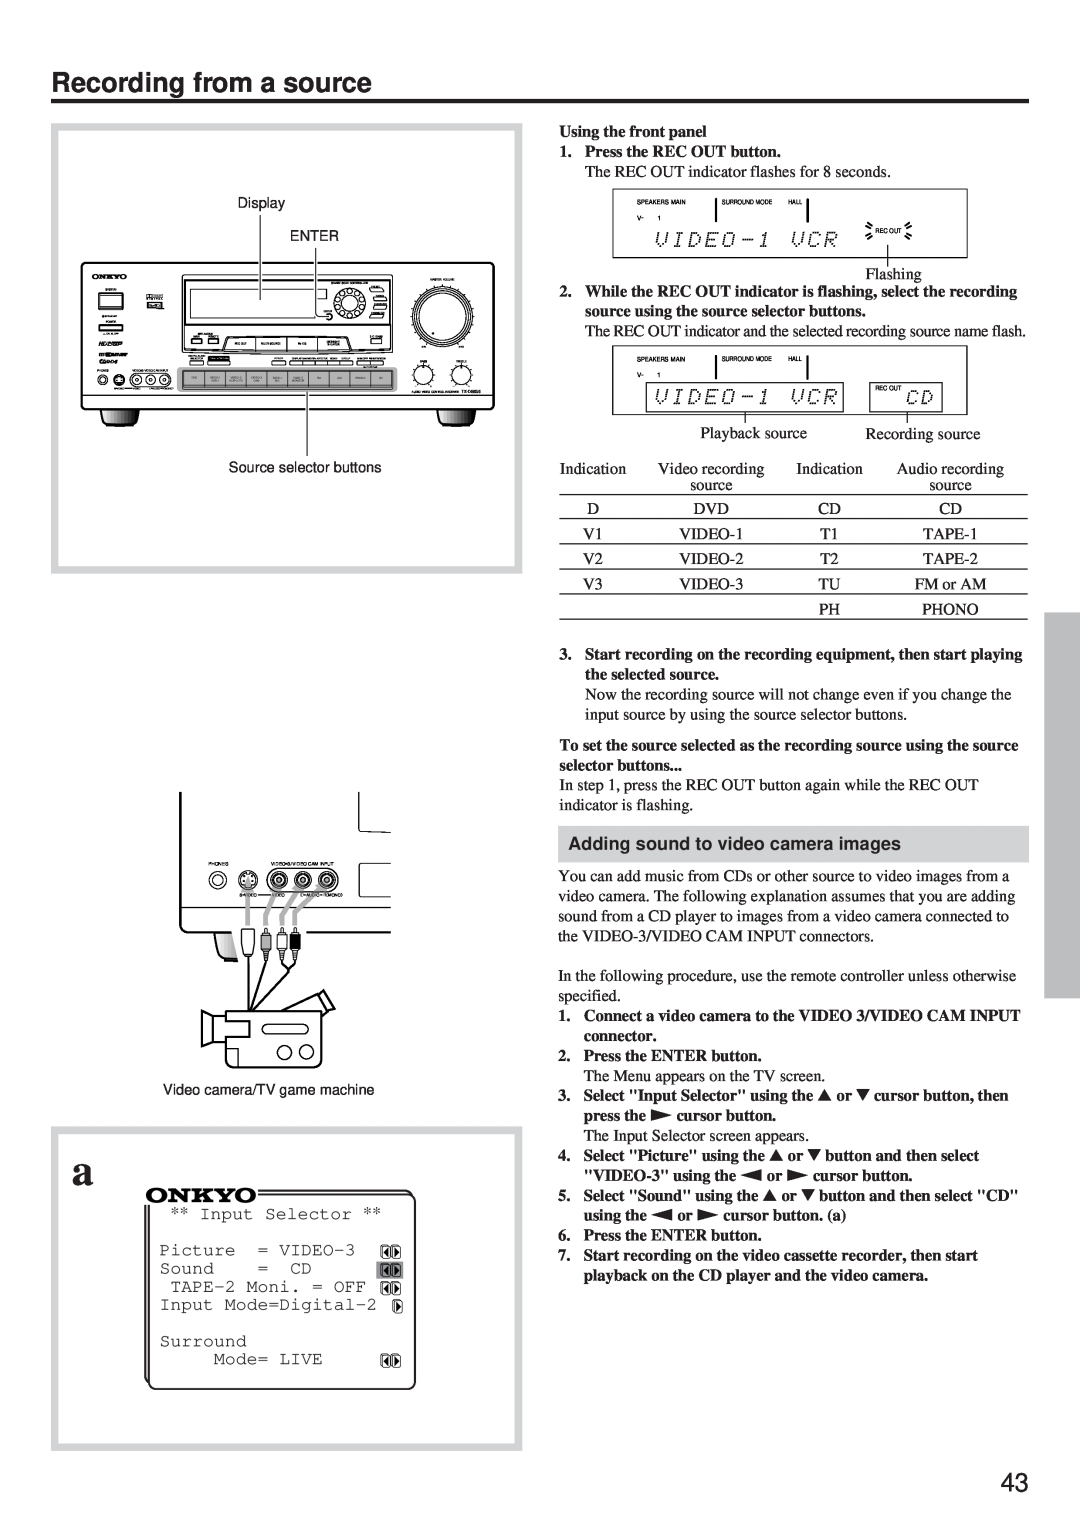 Onkyo TX-DS656 instruction manual Recording from a source, Input Selector Picture = VIDEO-3 Sound = CD, Mode= LIVE 